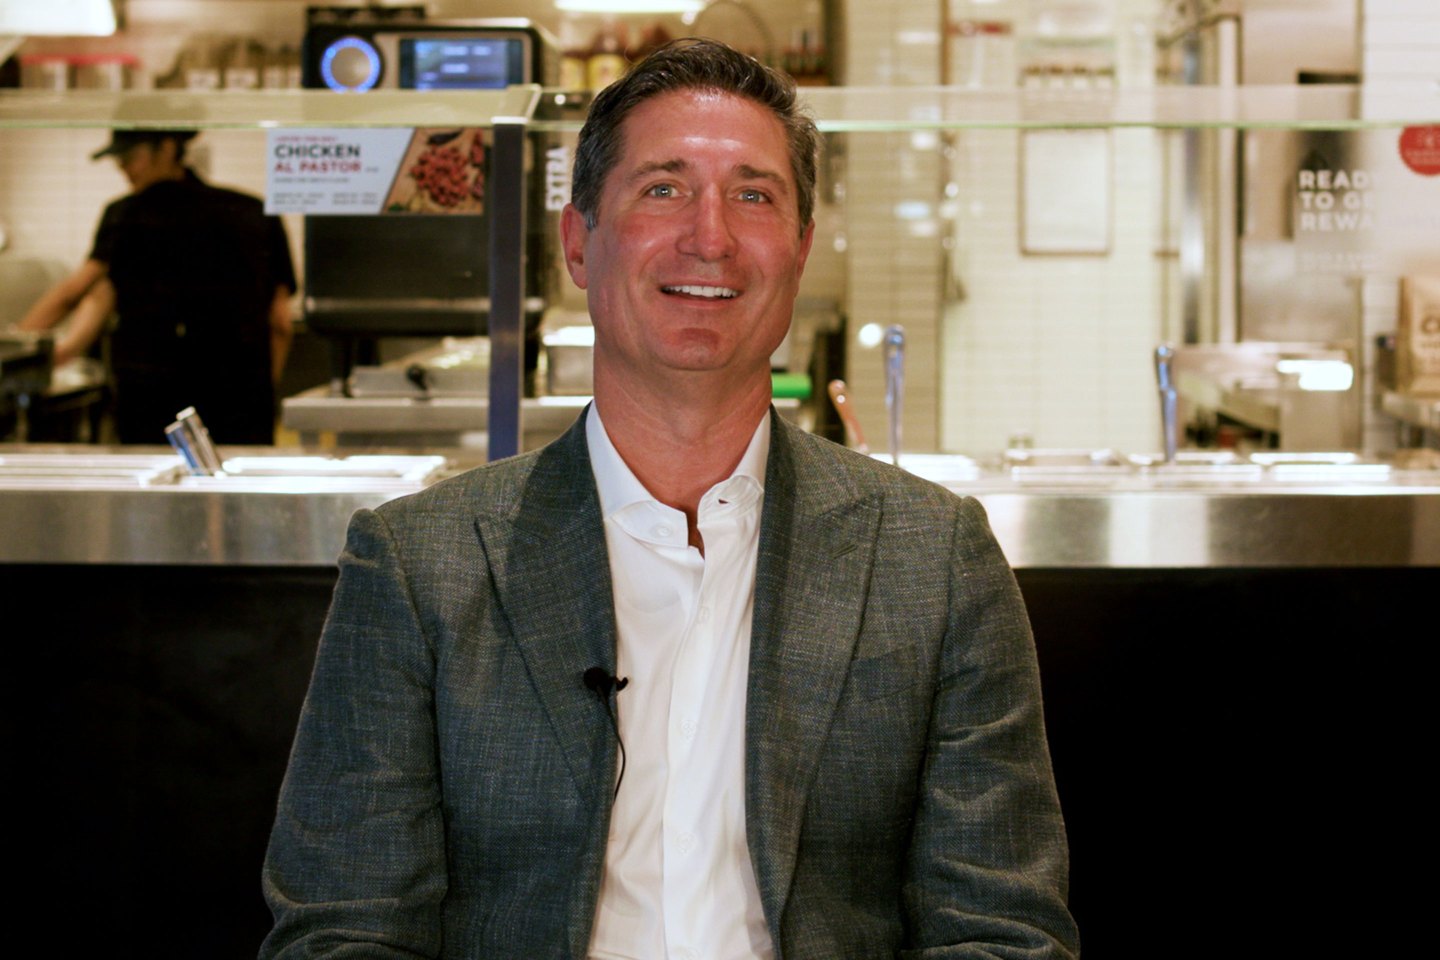 Chipotle CEO sitting in front of a Chipotle counter